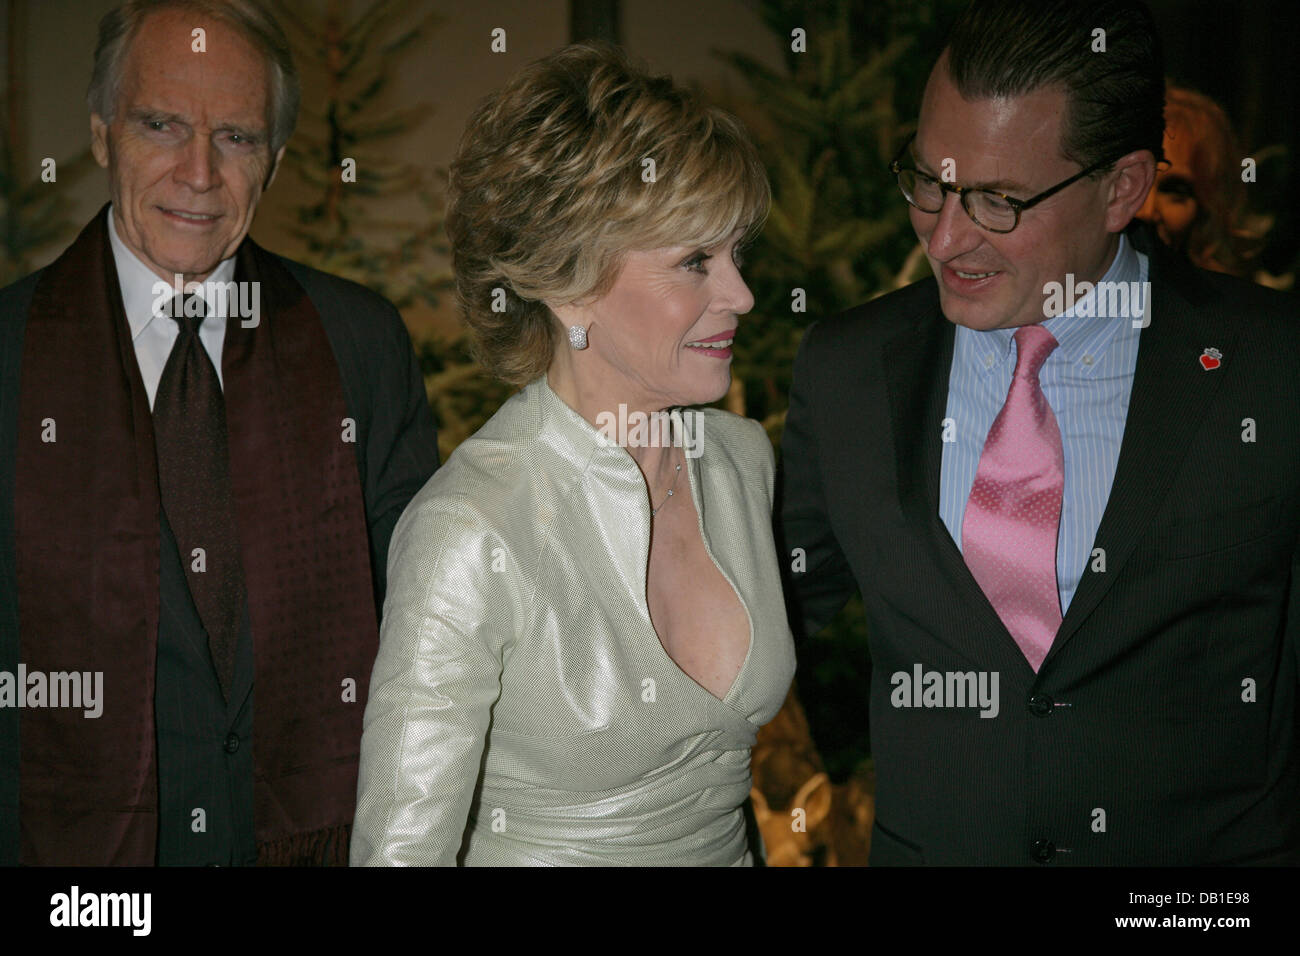 US actress Jane Fonda (C), accompanied by her partner Lynden Gillis (L), talks with Kai Diekmann (R), chief editor of Germany's biggest tabloid 'Bild', during the fundraising gala show 'Ein Herz fuer Kinder' (lit.: A Heart for Children) in Berlin, Germany, 15 December 2007. German public TV station ZDF and the Axel Springer publishing group raised more than 12 million euro donation Stock Photo